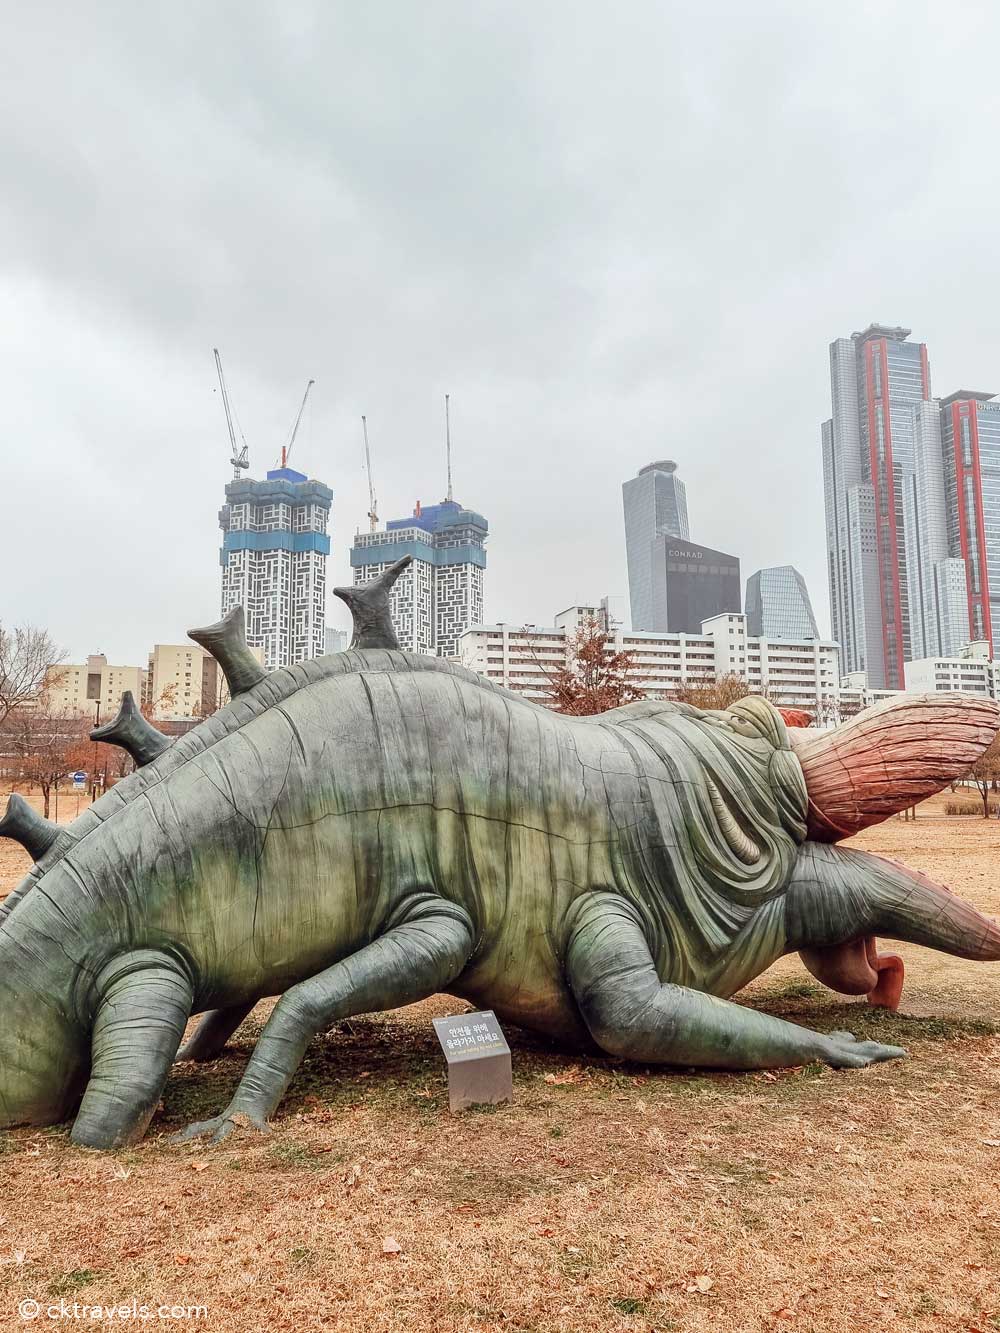 ‘The Host’ monster sculpture by the River Han In Seoul - Unique, Weird and Wonderful Seoul Attractions